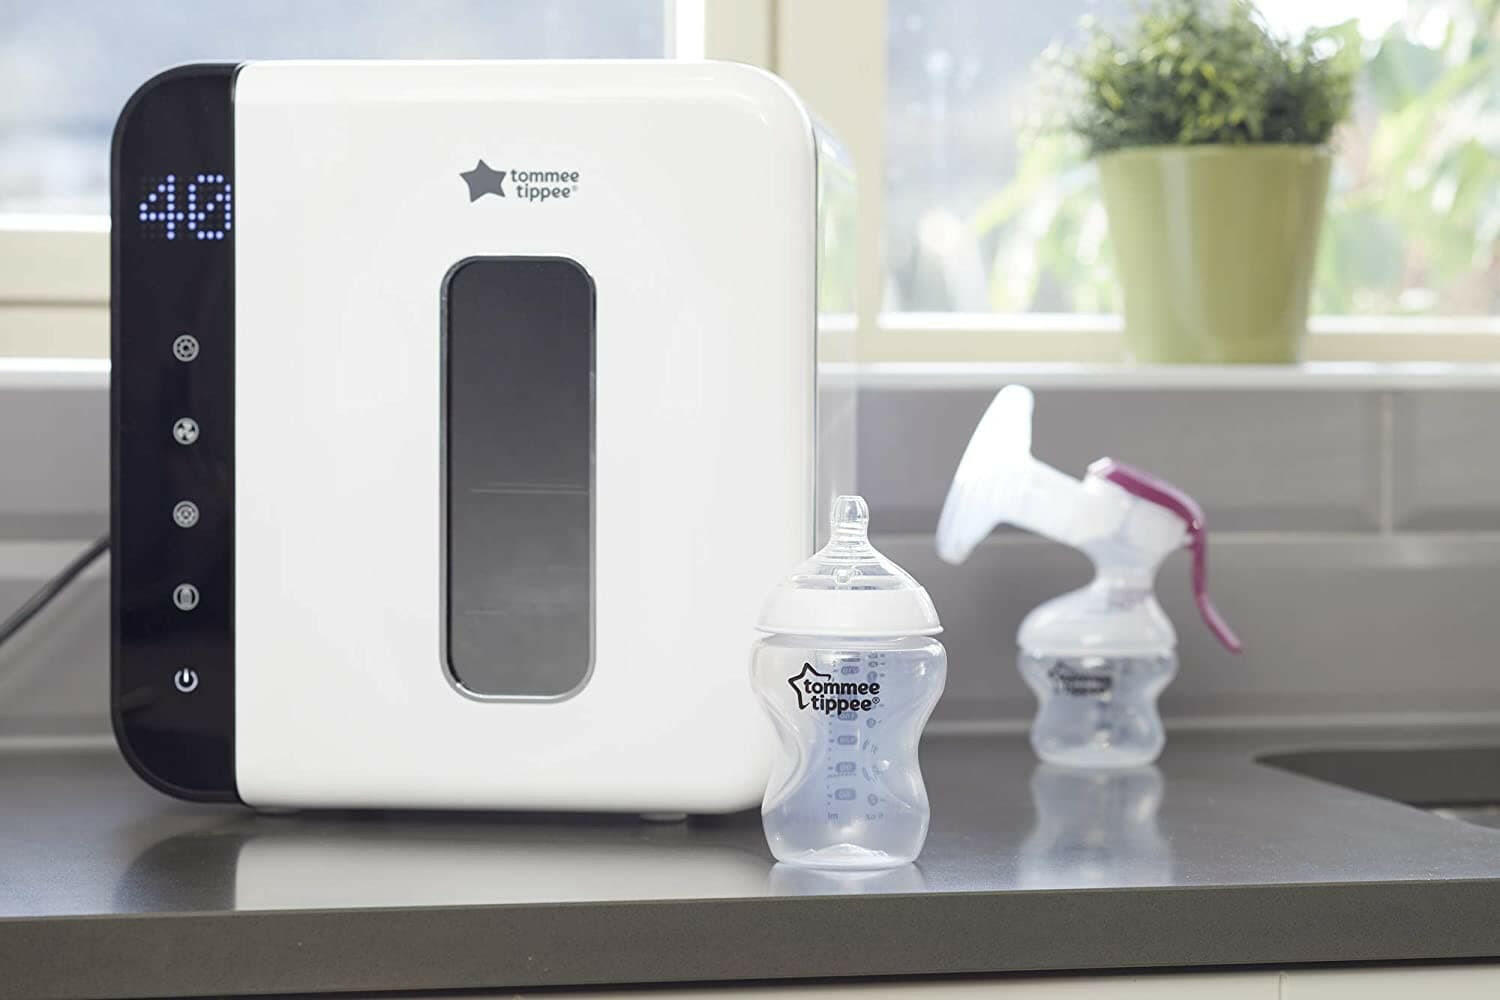 Tommee Tippee UV Sterilizer 3 in 1 - White and Black.